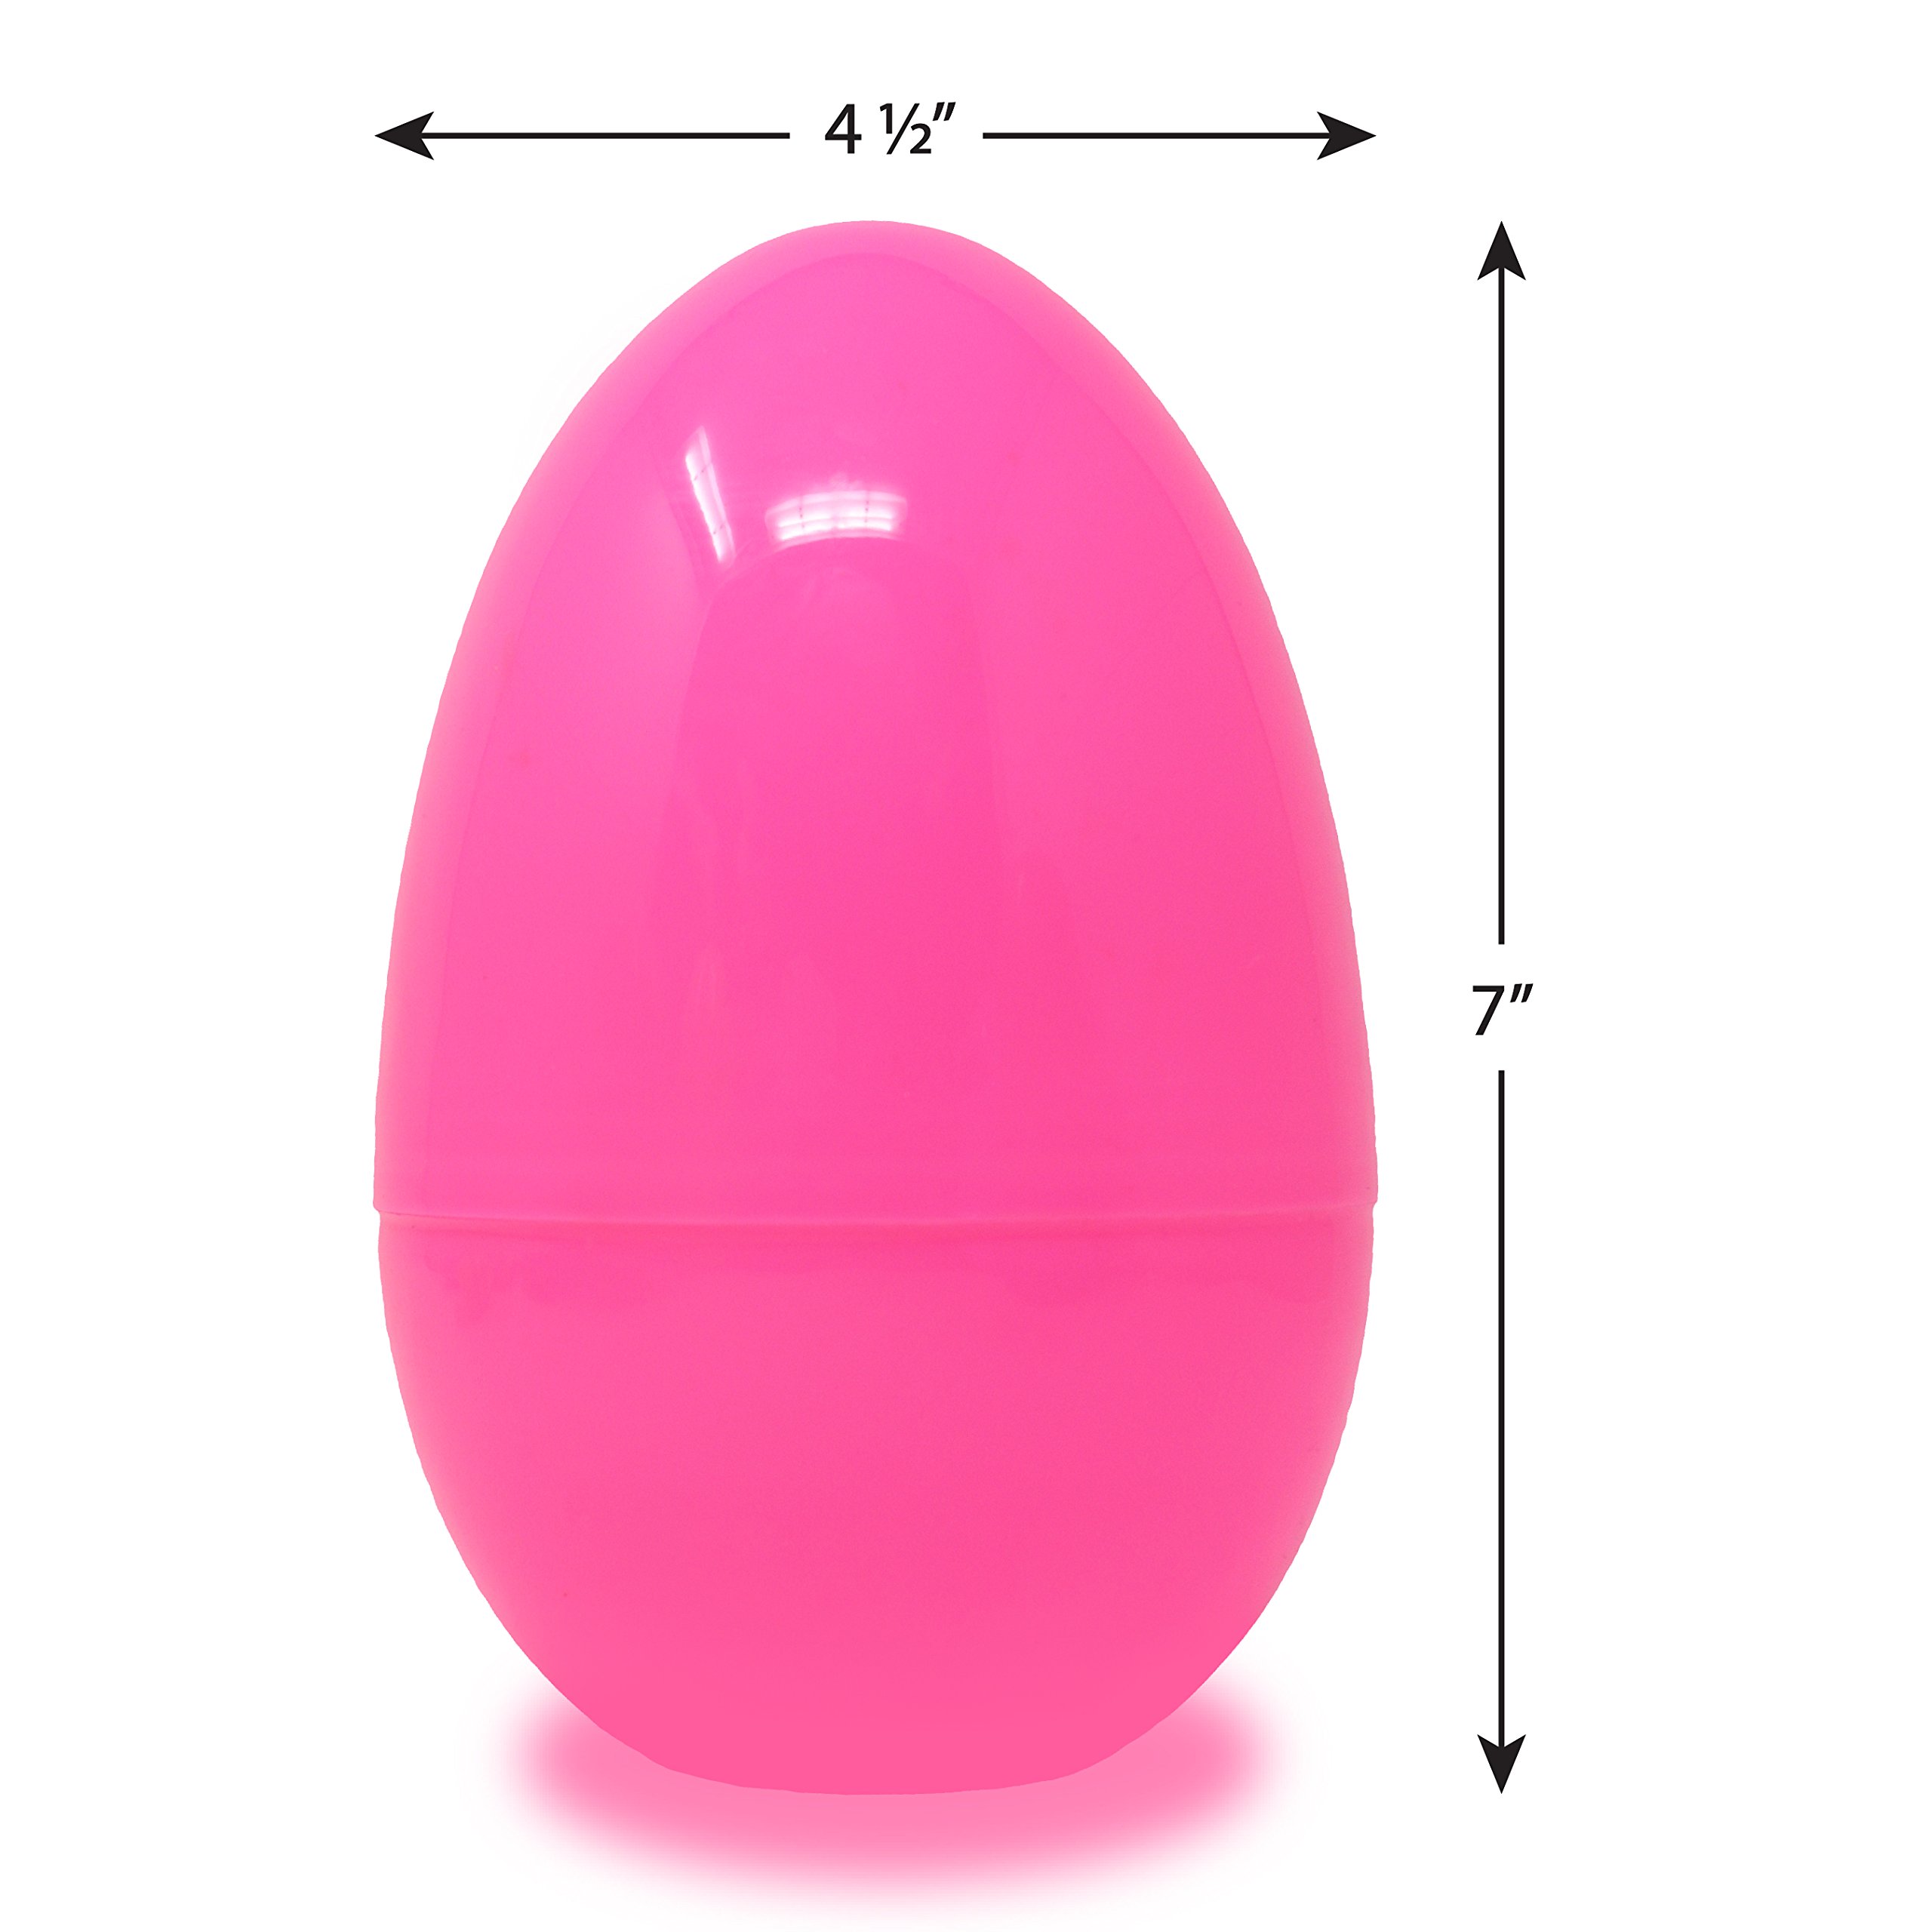 JOYIN 12 Pieces 7" Jumbo Plastic Bright Solid Easter Eggs Assorted Colors for Filling Treats, Easter Theme Party Favor, Easter Eggs Hunt, Basket Stuffers Fillers, Classroom Prize Supplies Toy - image 3 of 6